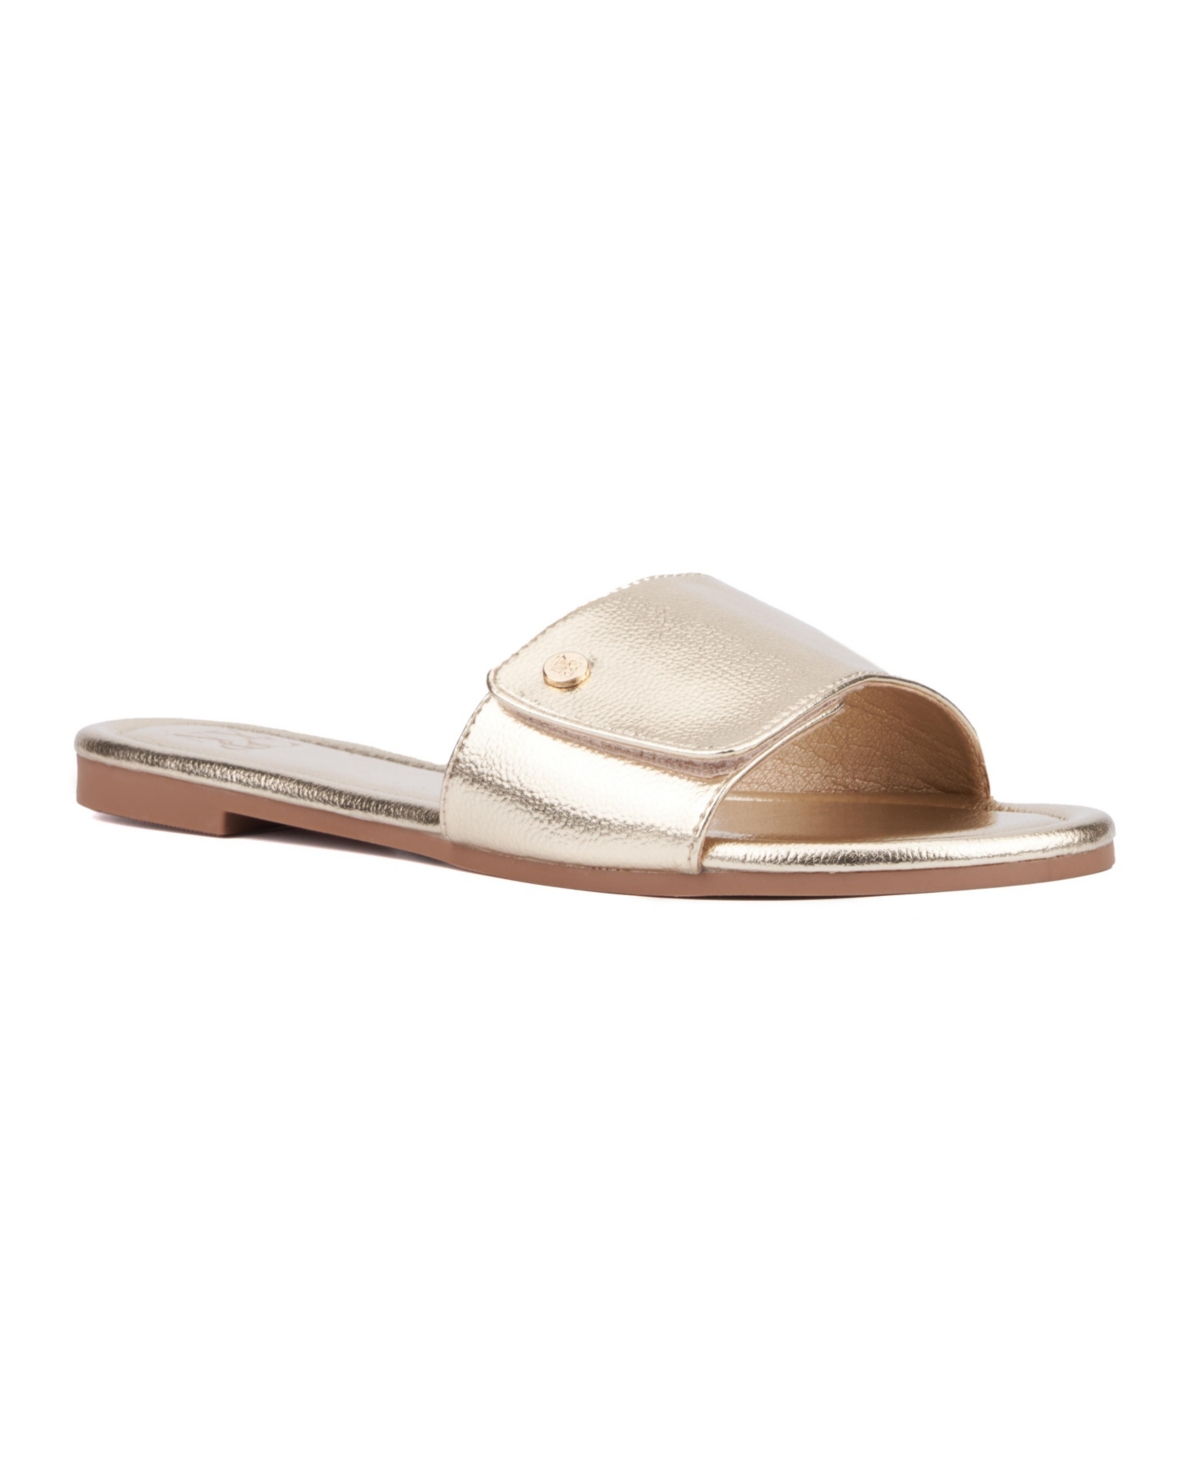 NEW YORK AND COMPANY WOMEN'S ADELLE FLAT SANDAL